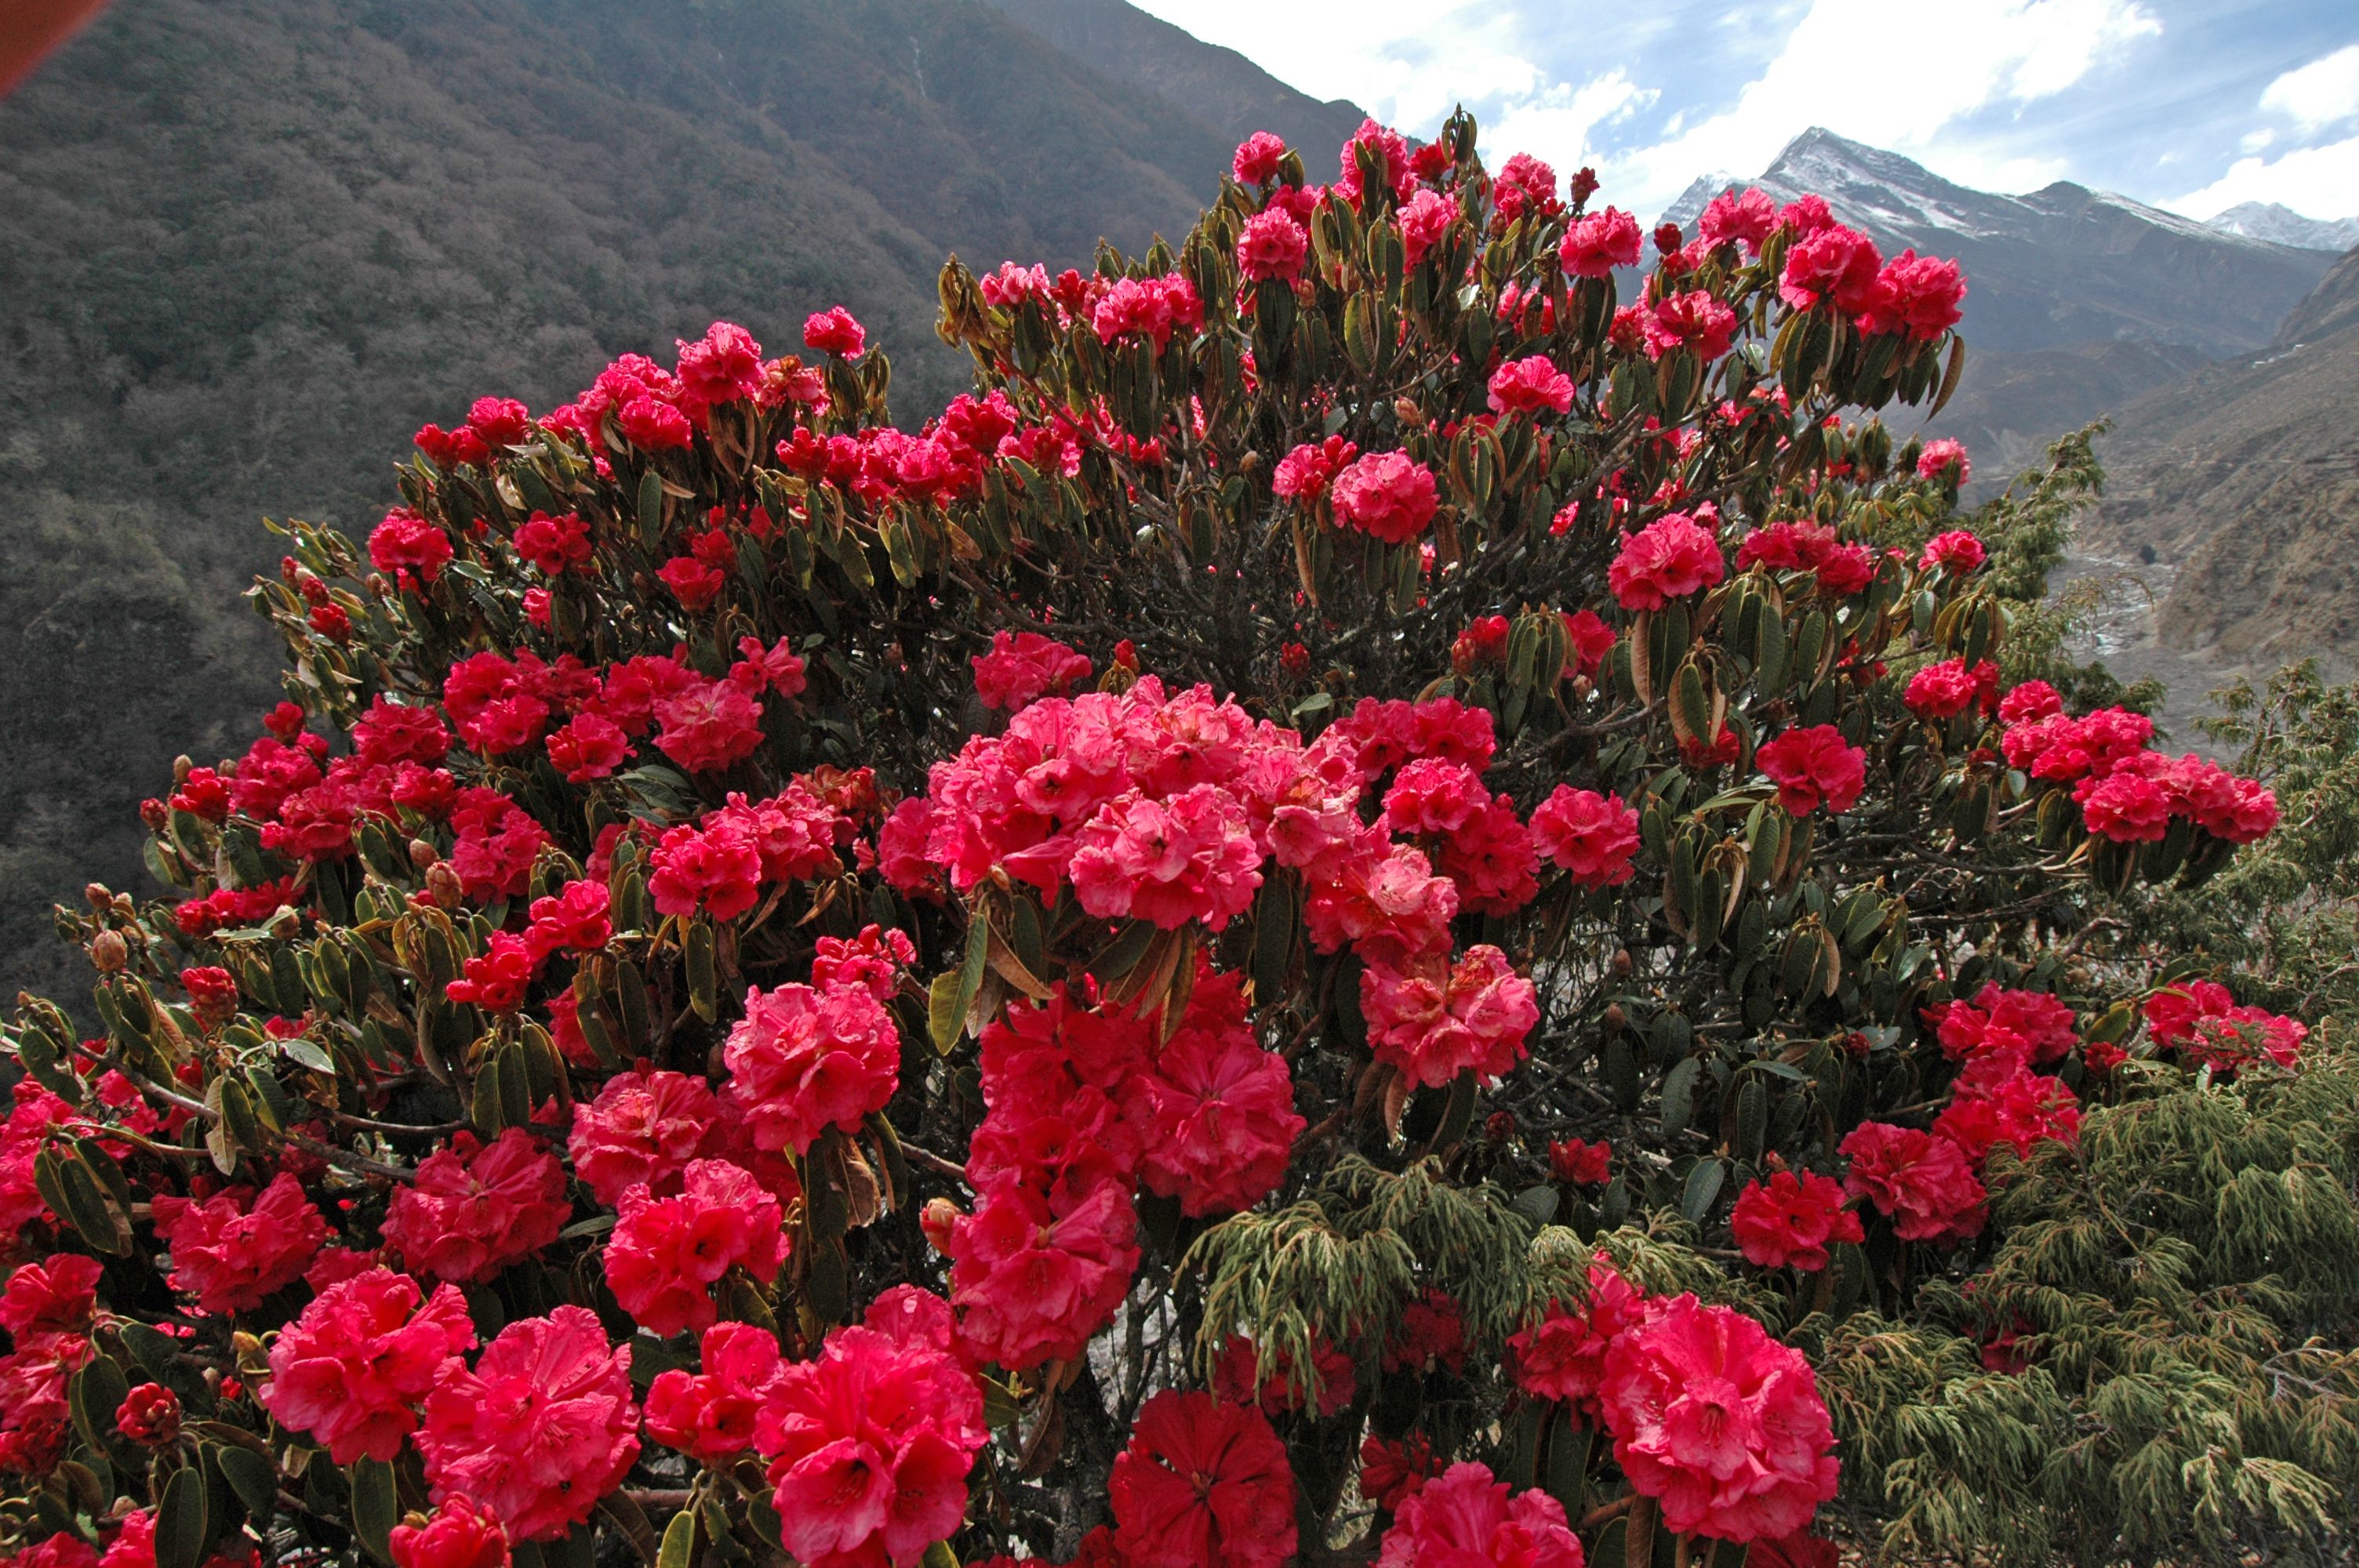 Rhododendron Forest in the Sagarmatha National Park, Himalaya, Nepal. Apis laboriosa workers visit rhododendron flowers during the spring to create what is known as mad honey. 